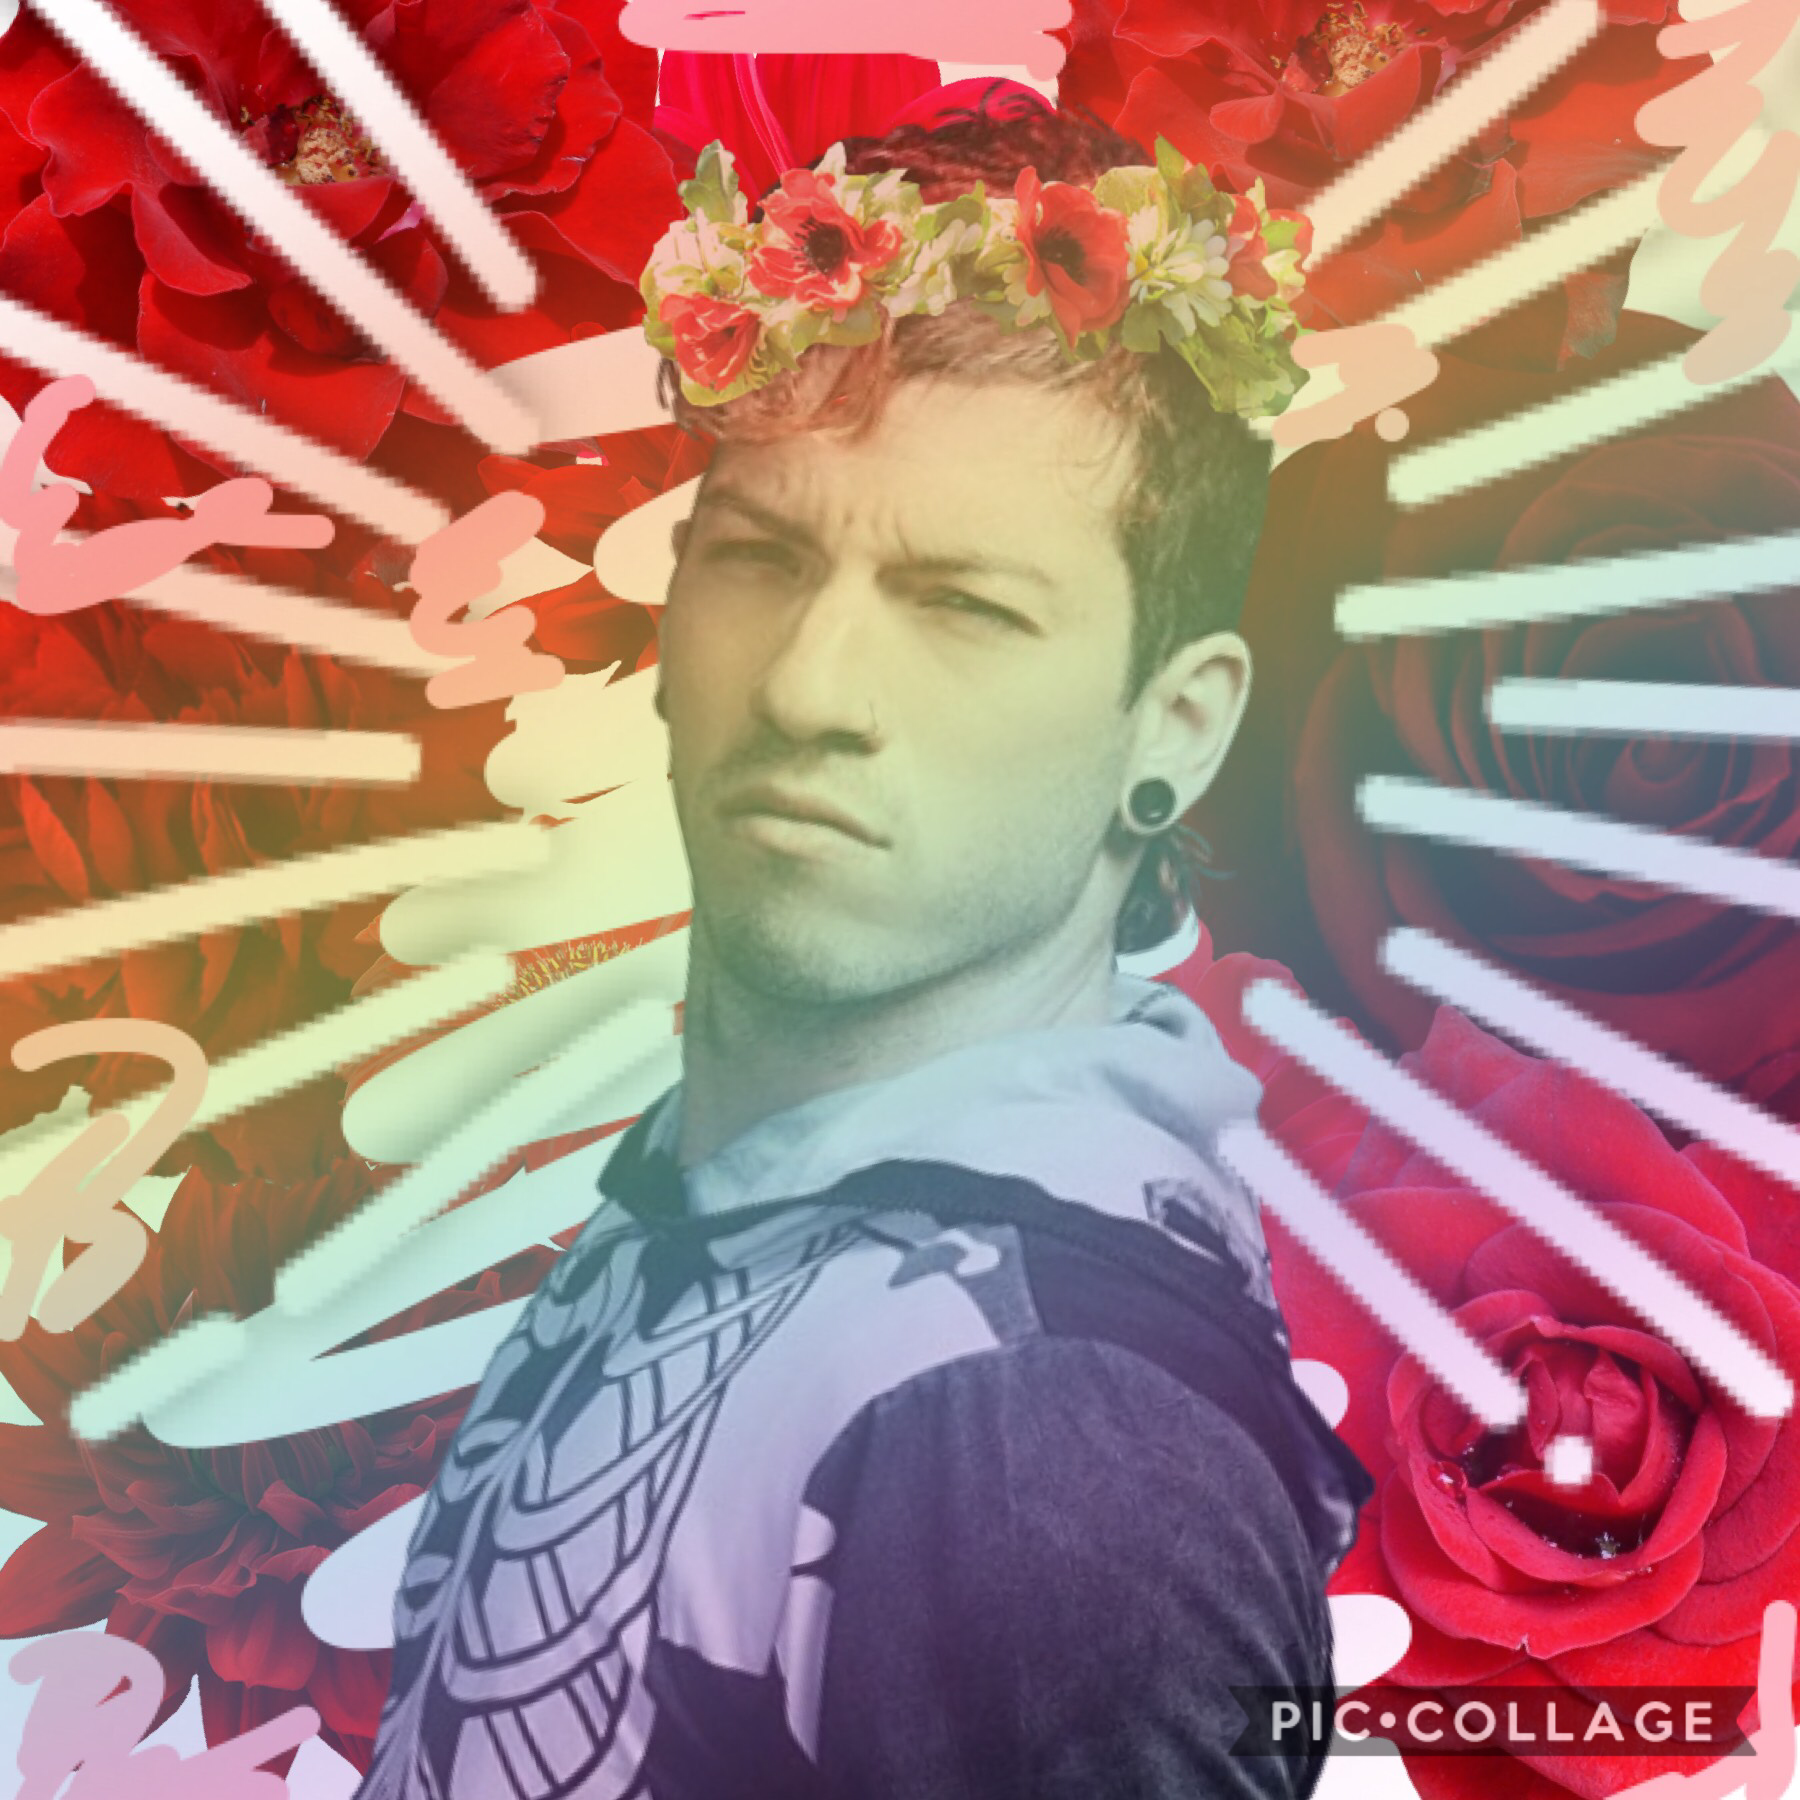 so apparently I can’t go to the tøp concert after all .. but I don’t feel like ranting abt that rn. anyways here’s a crâppy edit of jishwa for y’all to enjoy. should I post an August playlist ? I neglected to ever post a July one ... 